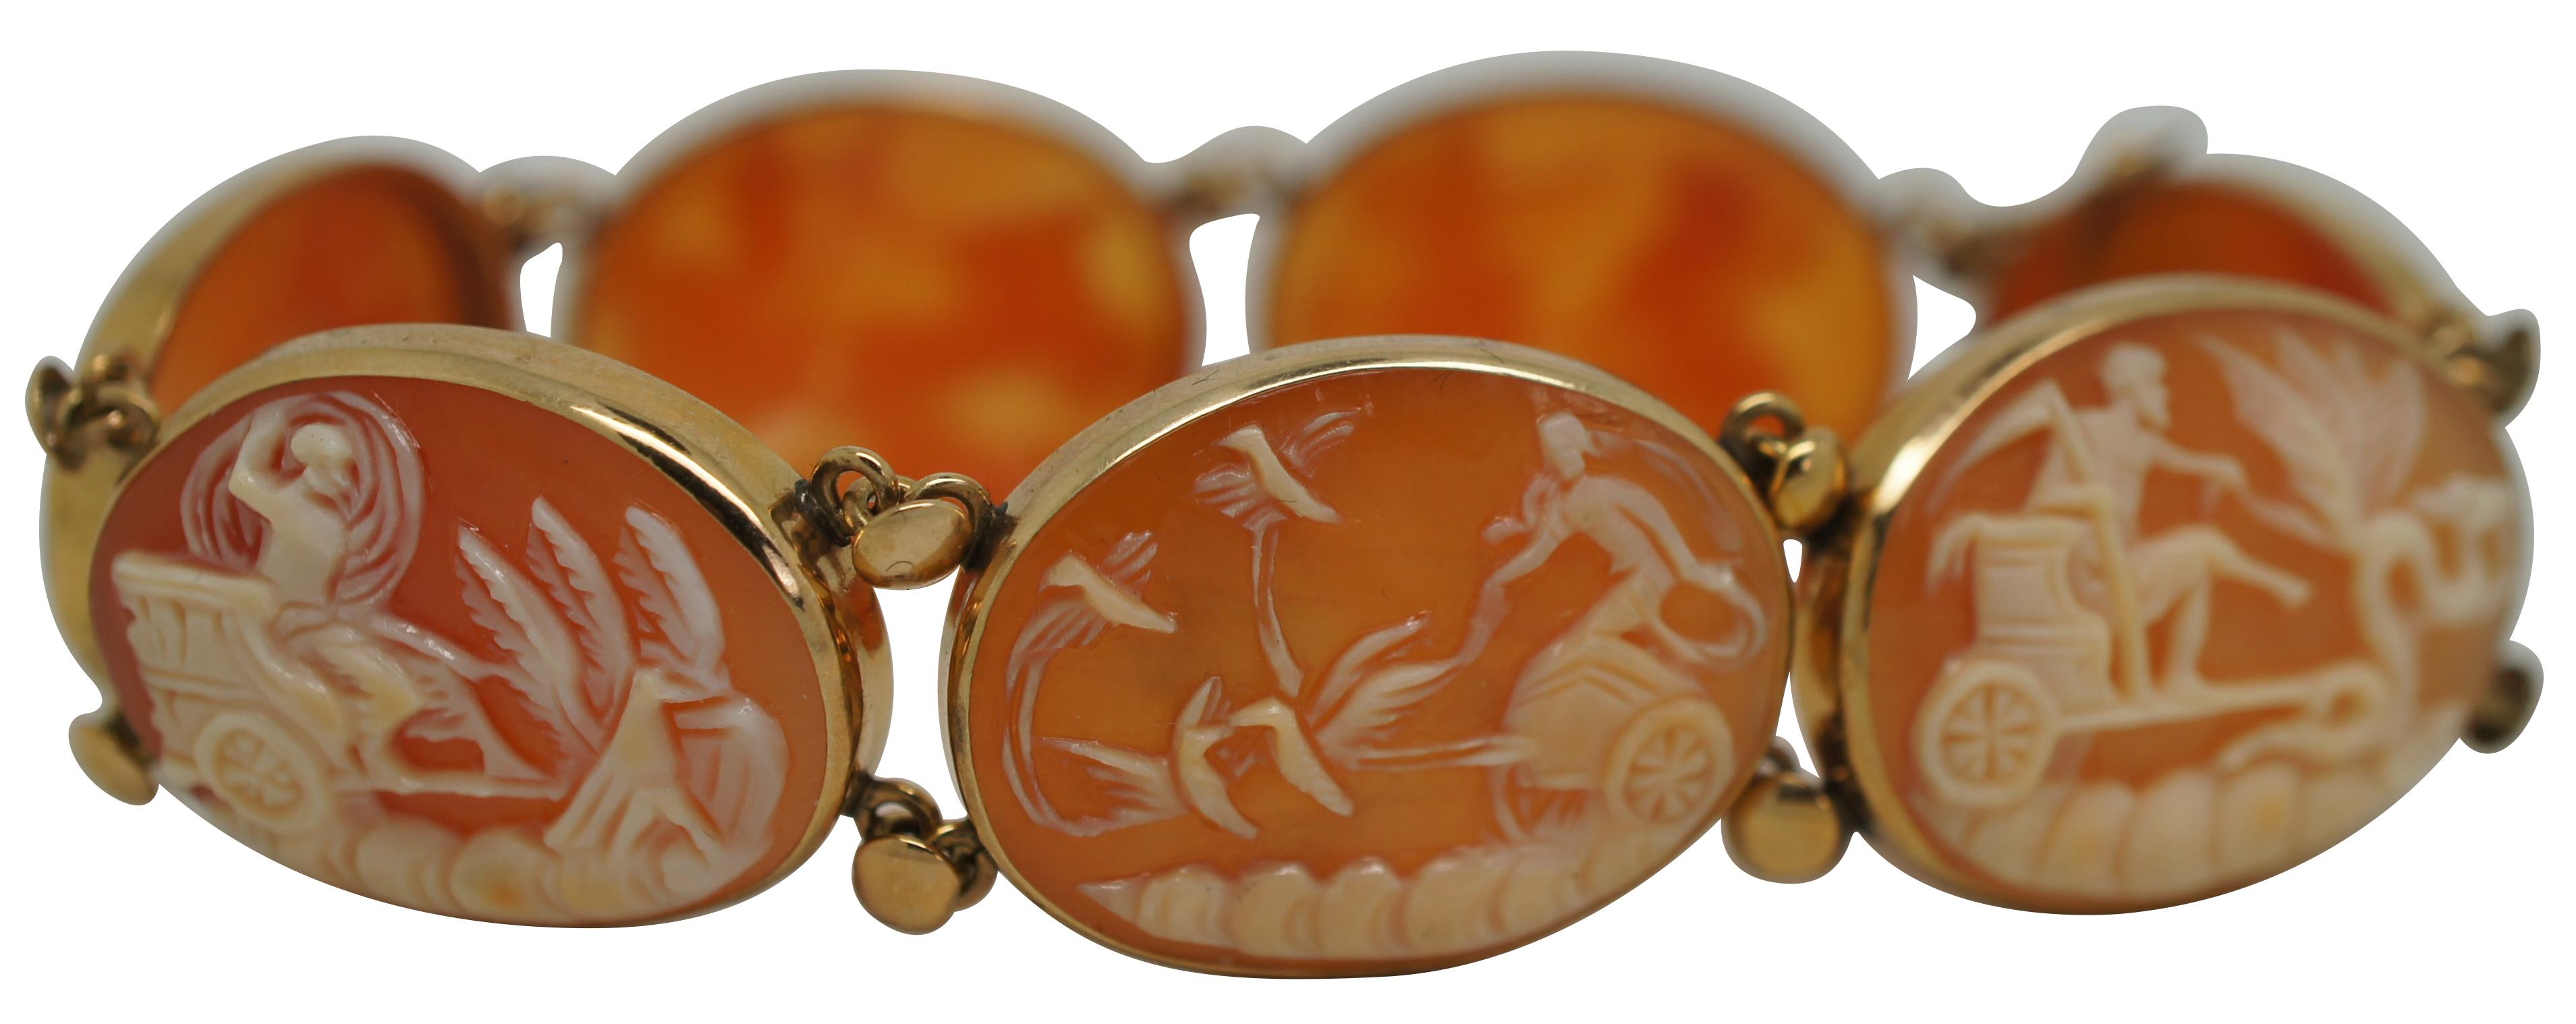 Vintage mid 20th century Italian 14k yellow gold and carved shell cameo bracelet with open box clasp, featuring seven discrete neoclassical scenes of Greek / Roman gods and goddesses driving chariots.